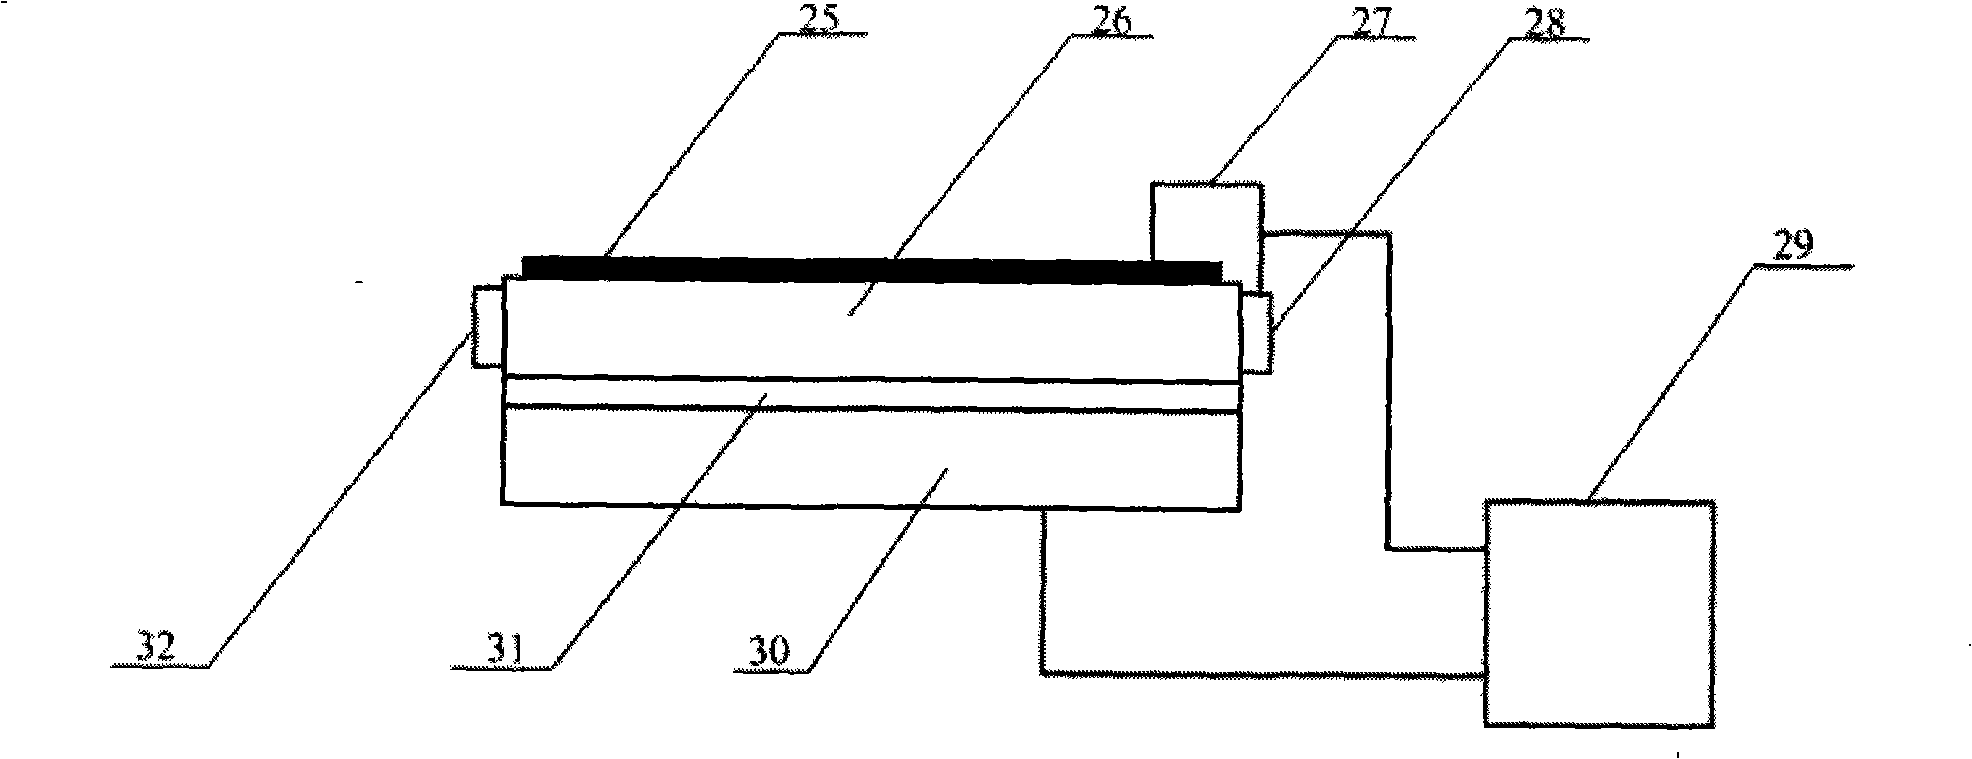 Multi-light axis consistency test device based on multiband target plate and rotating reflection mirror